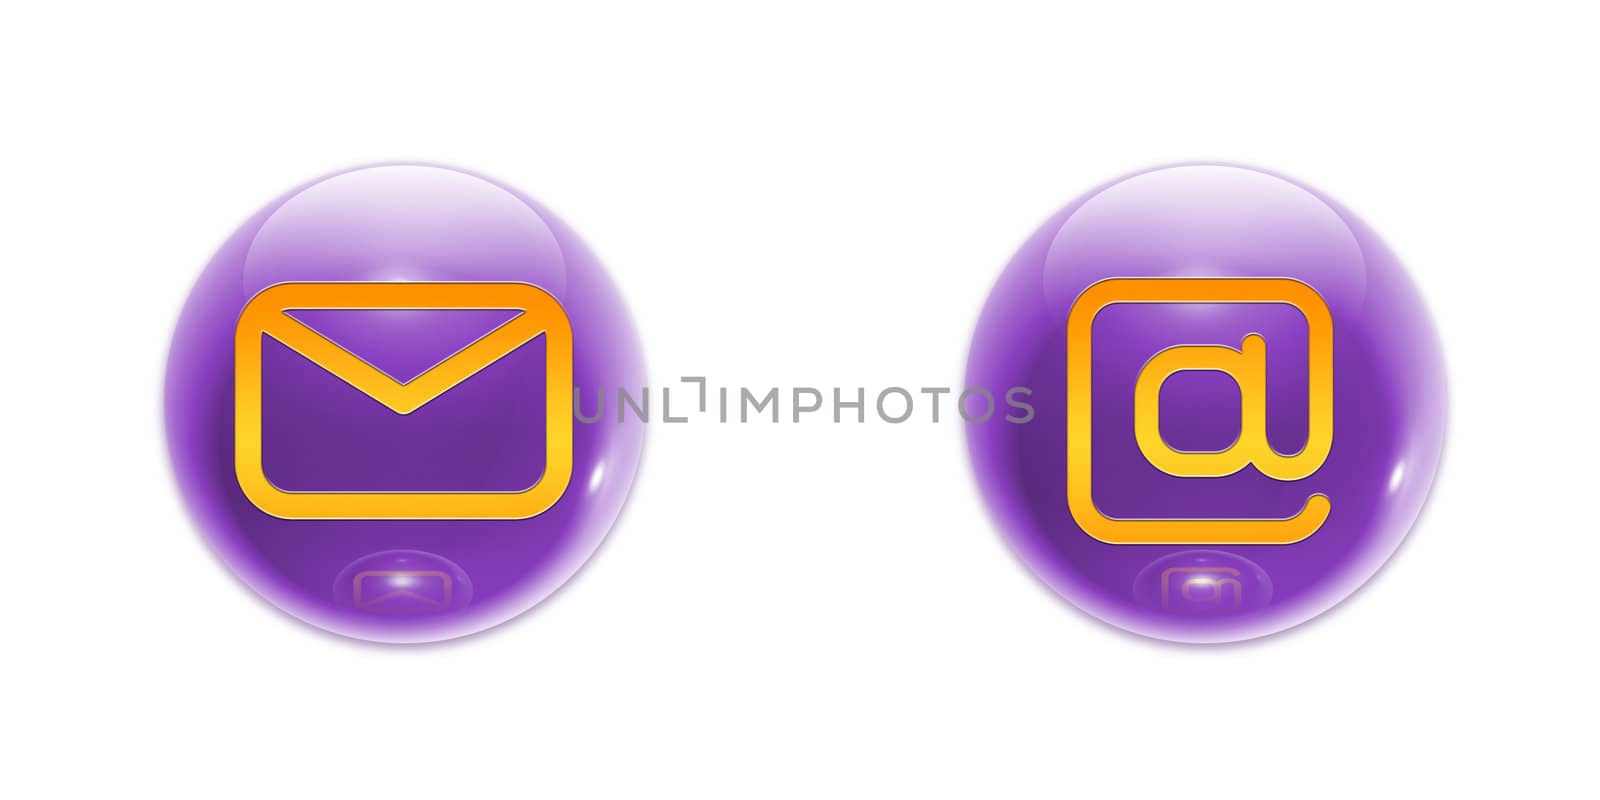 3D Spheres With E-Mail and Internet Icons (jpeg file has clipping path)